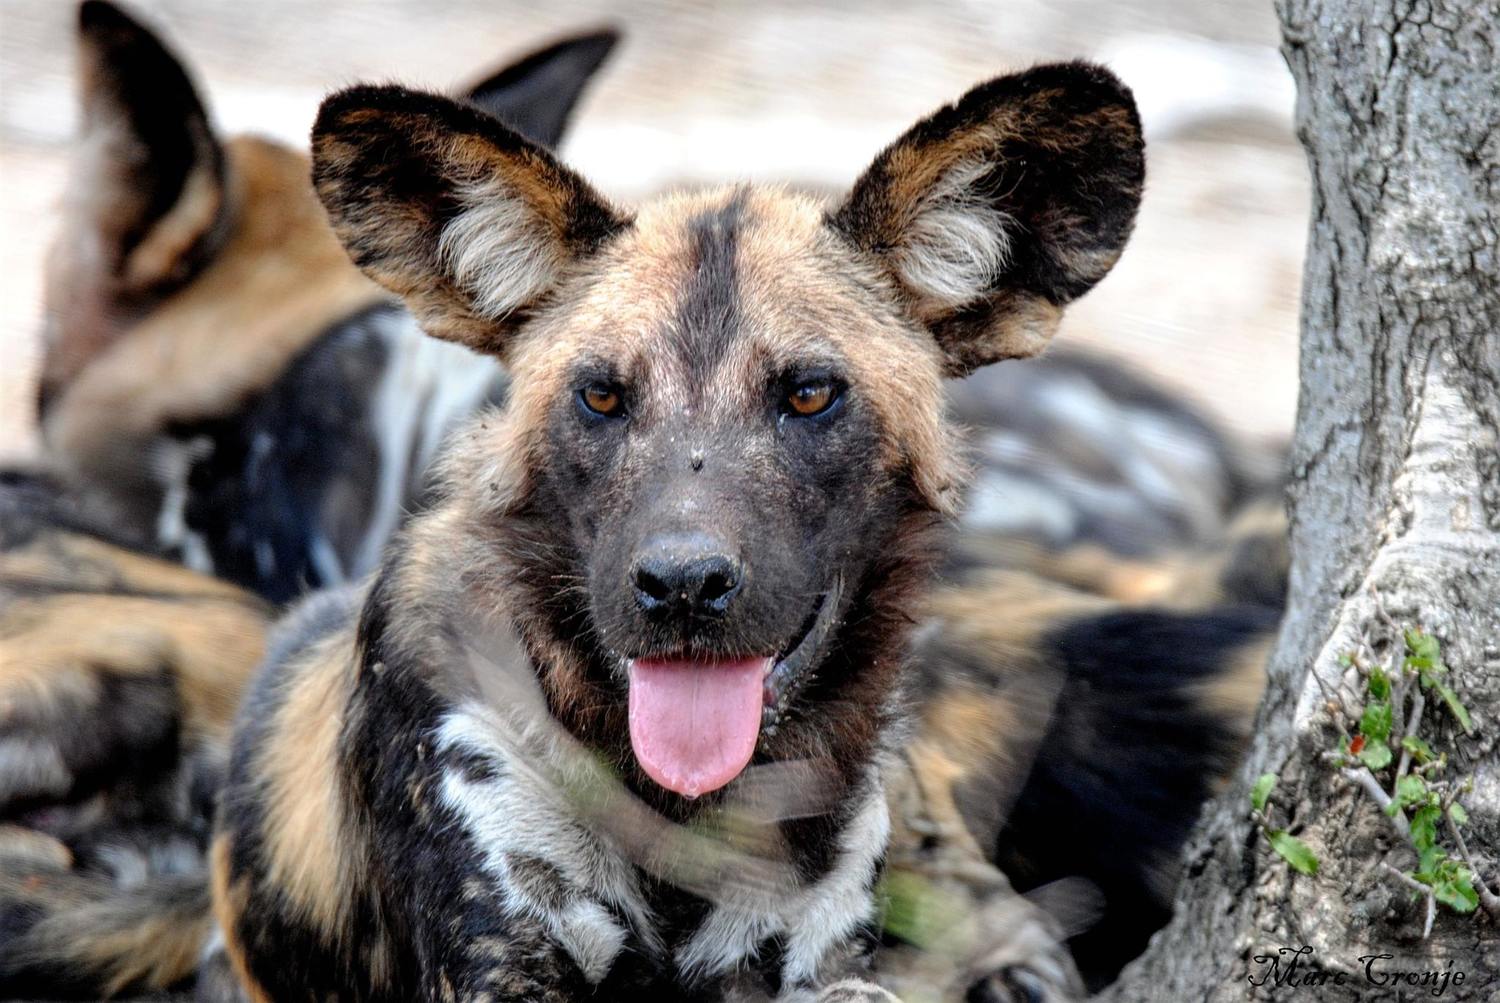 Wildlife Field Guide: African Painted or Wild Dog